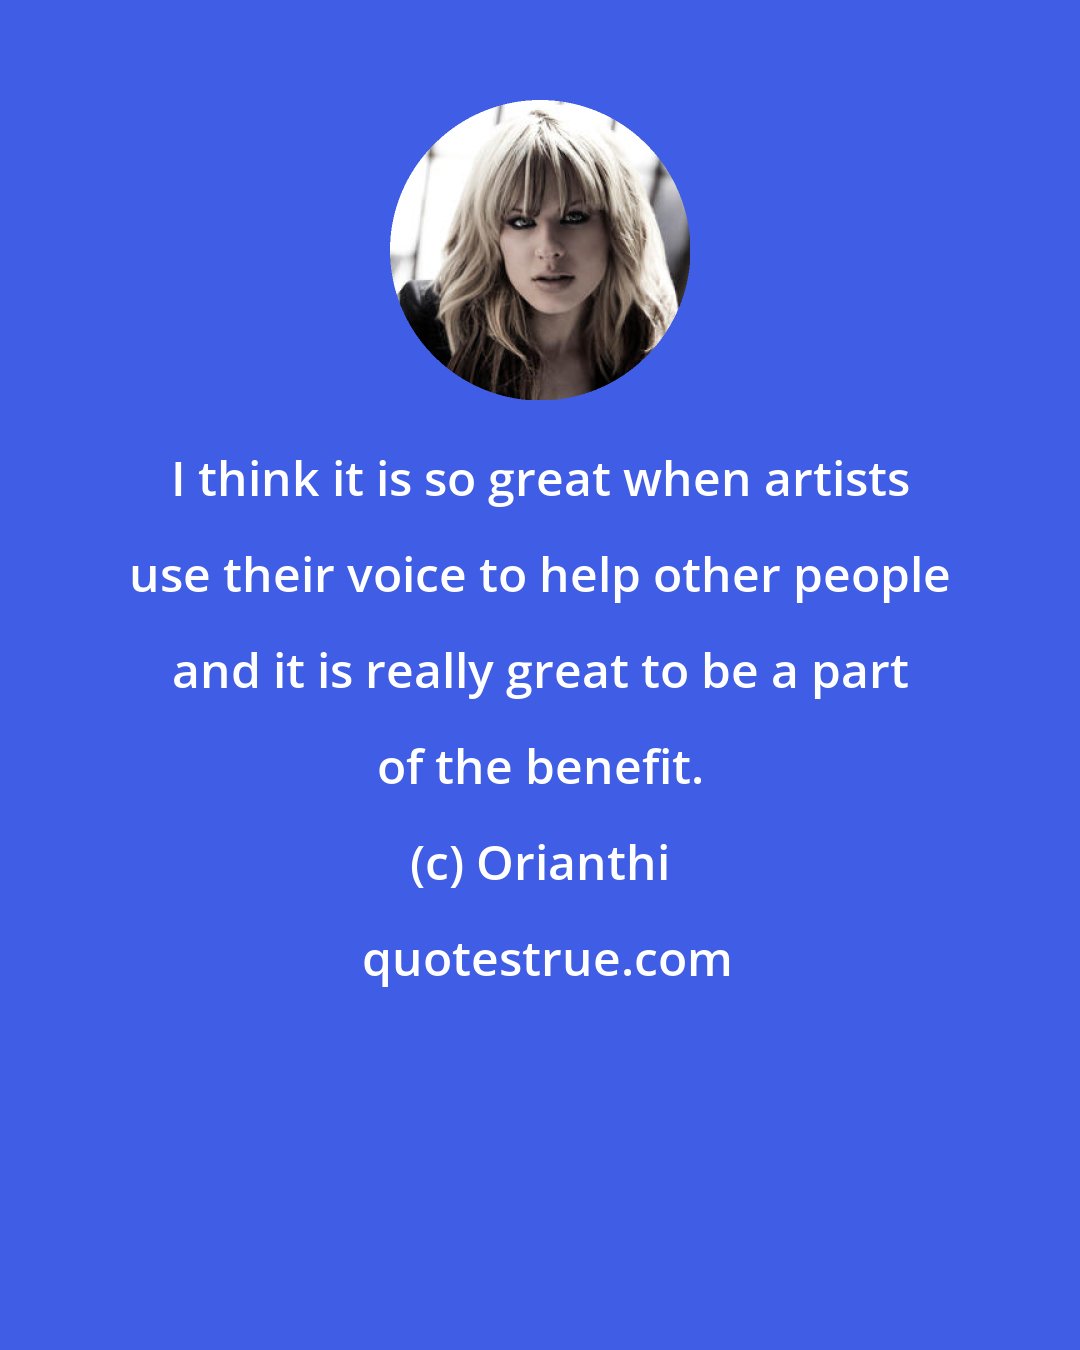 Orianthi: I think it is so great when artists use their voice to help other people and it is really great to be a part of the benefit.